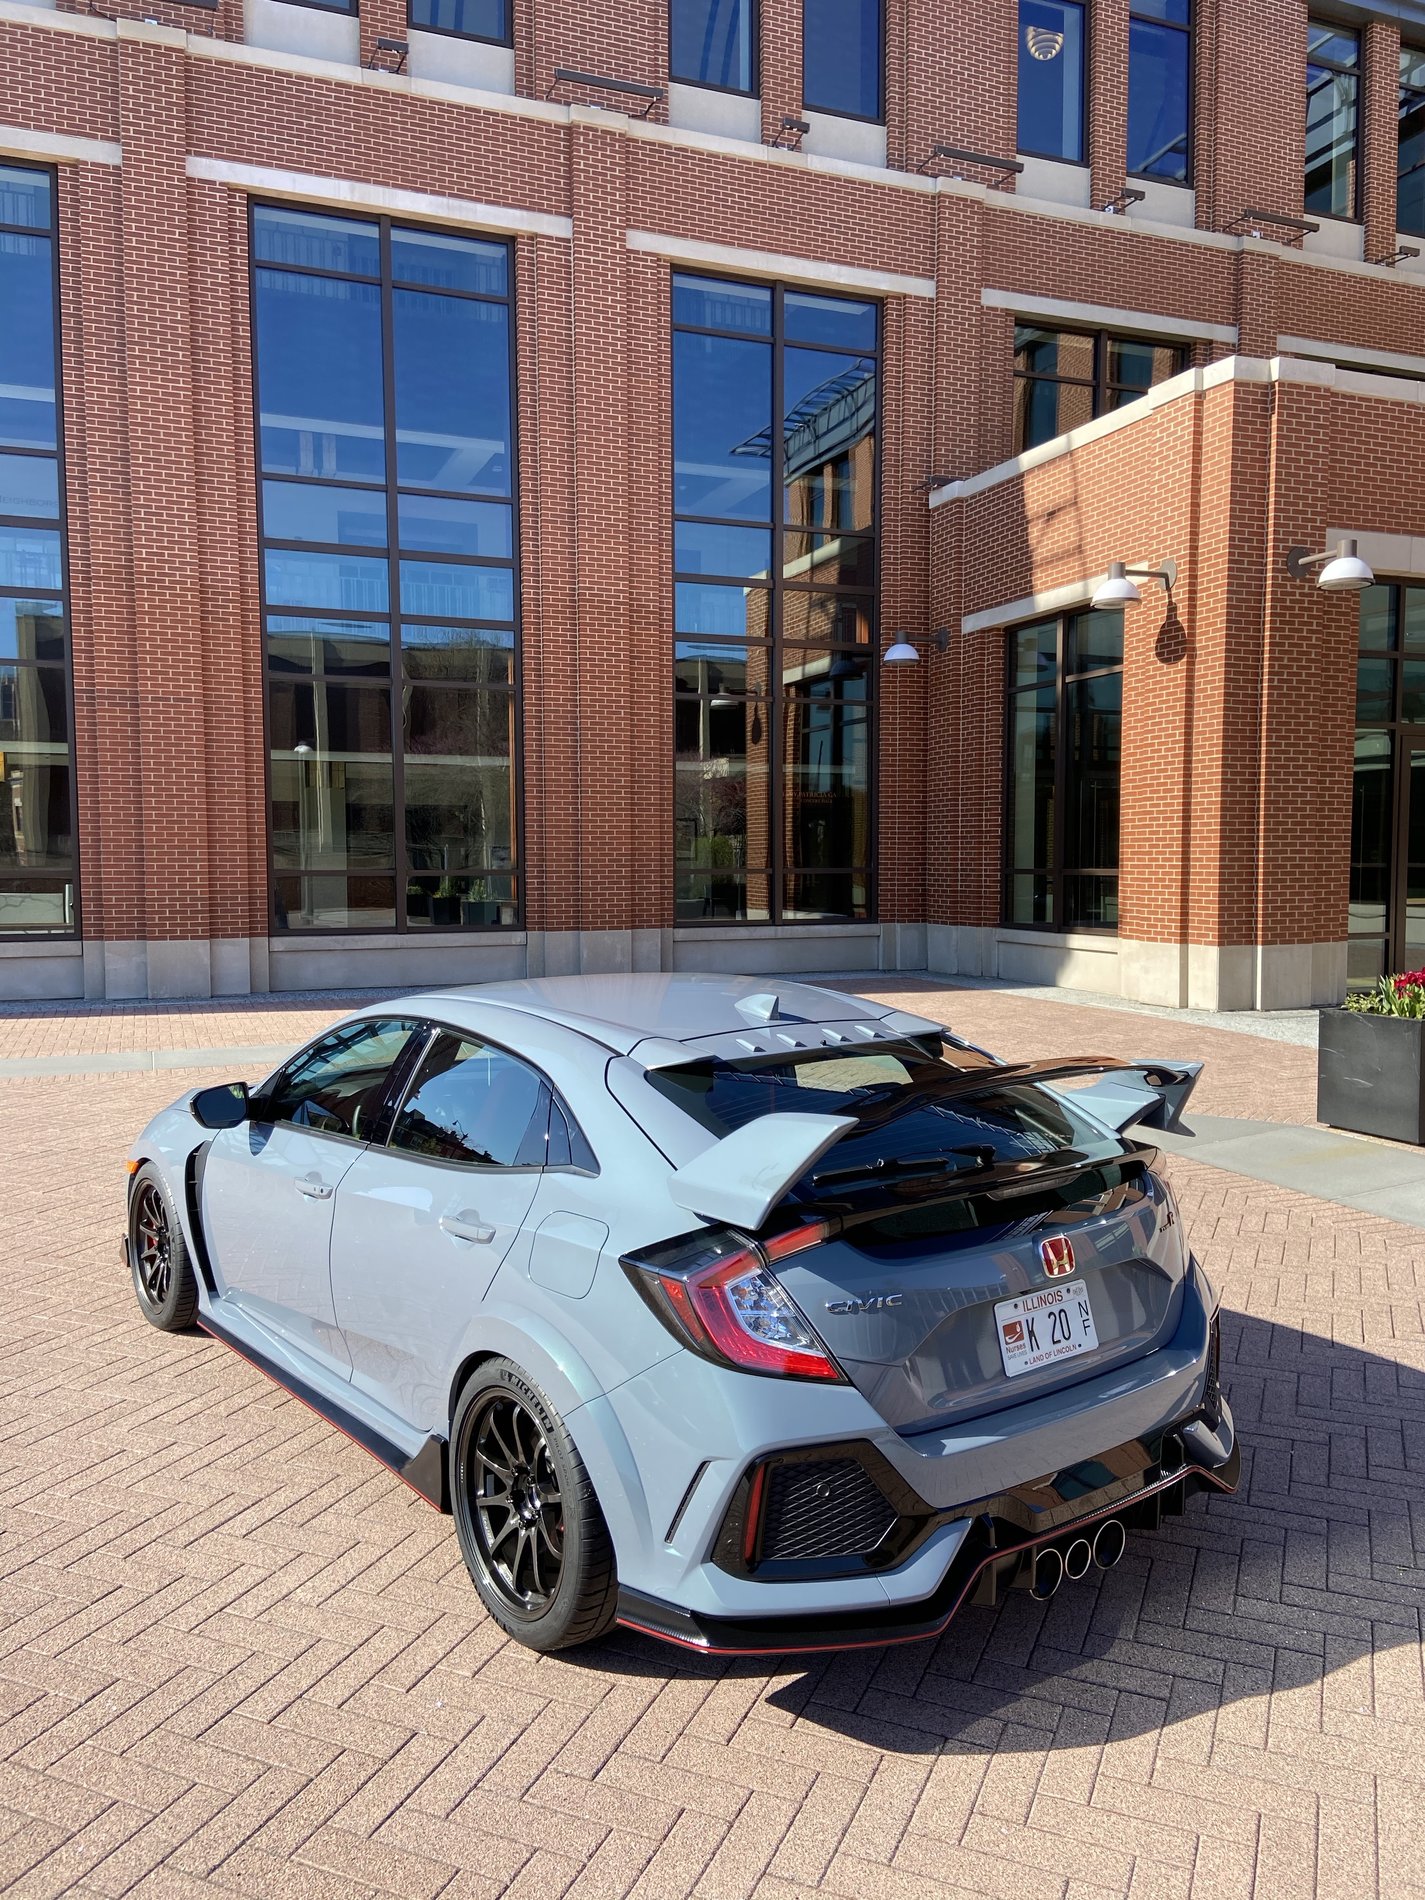 Honda Civic 10th gen Official Sonic Grey Pearl Type R Picture Thread 6iHT4oNyTzeSlFVMONh2eA